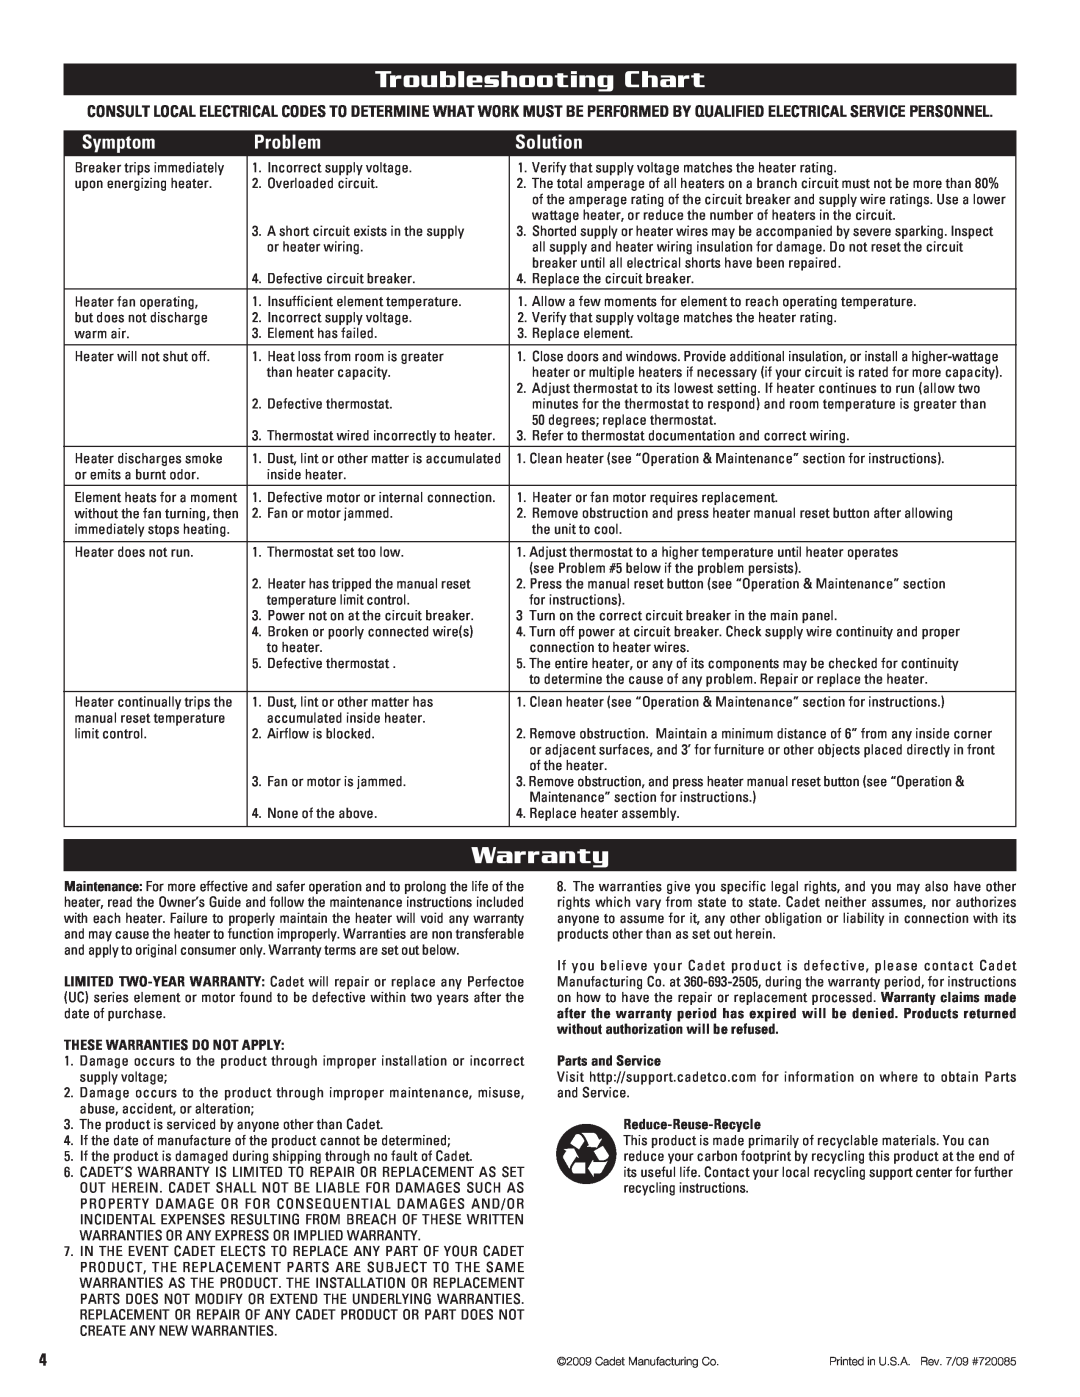 Cadet UC072 Troubleshooting Chart, Warranty, Symptom, Problem, Solution, These Warranties Do Not Apply, Parts and Service 